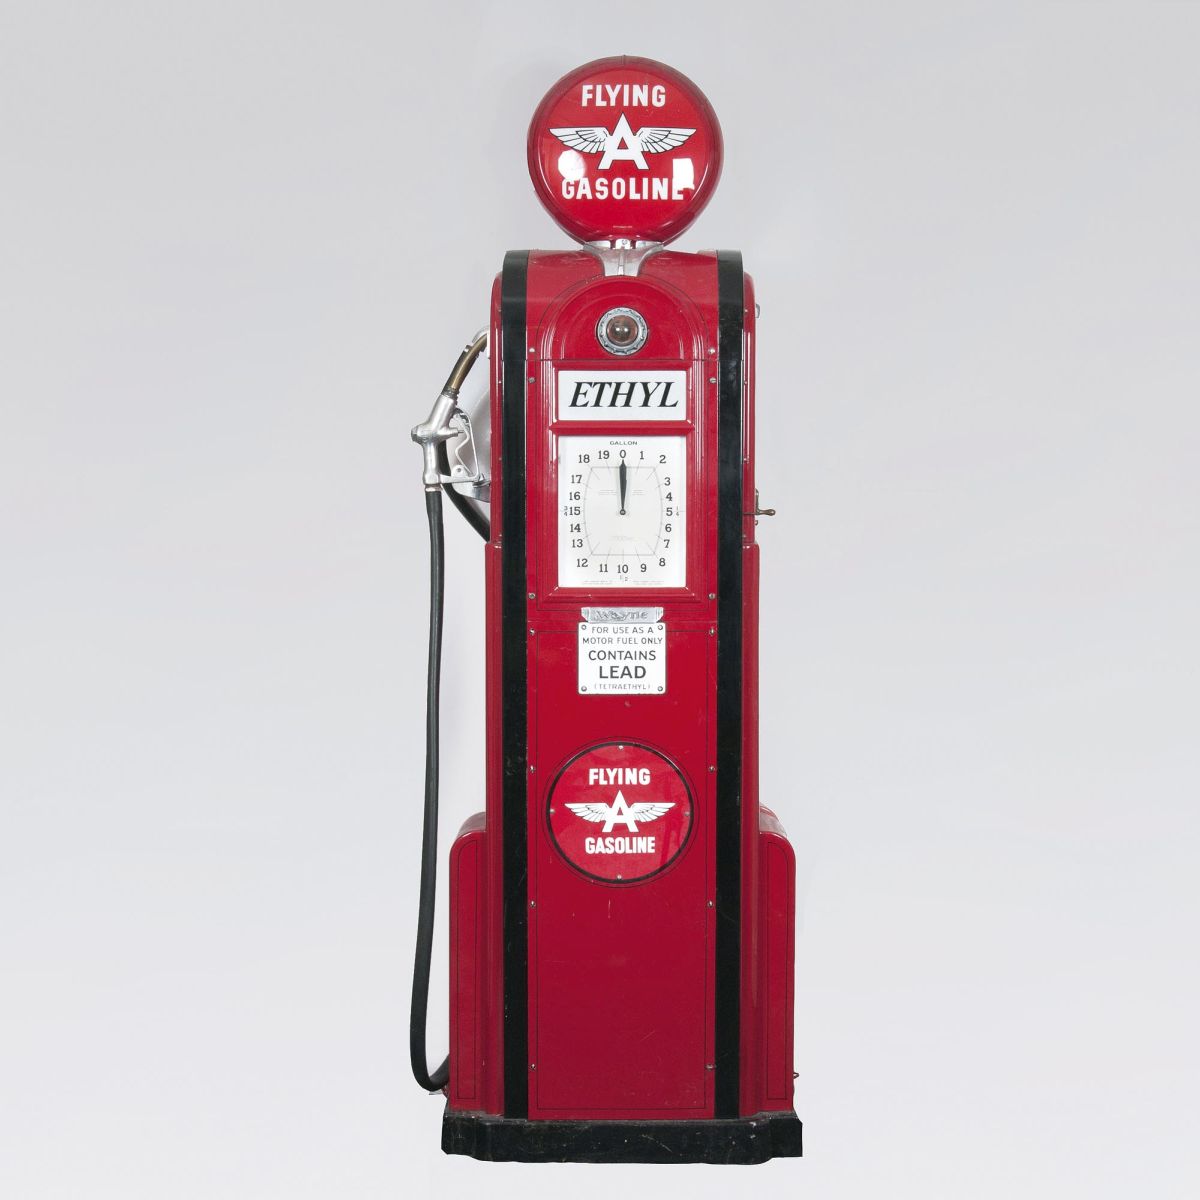 Authentic 'Flying Gasoline' Pump